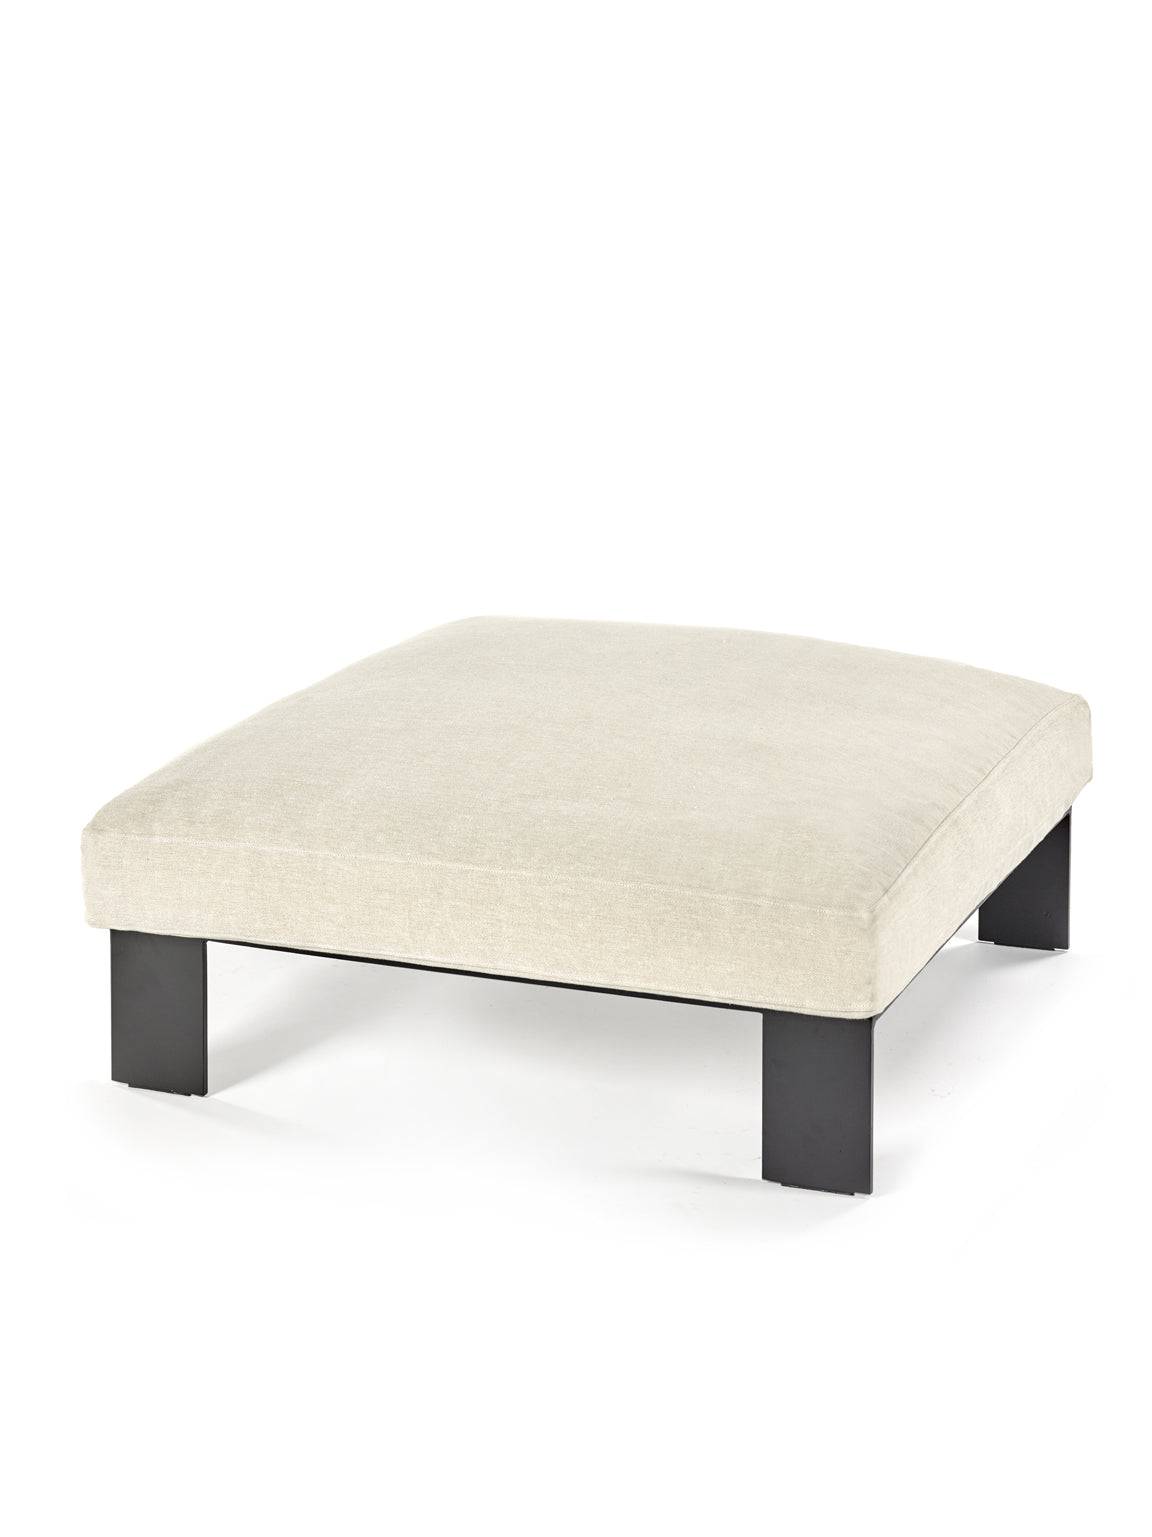 Mombaers Outdoor Ottoman - Beige - THAT COOL LIVING